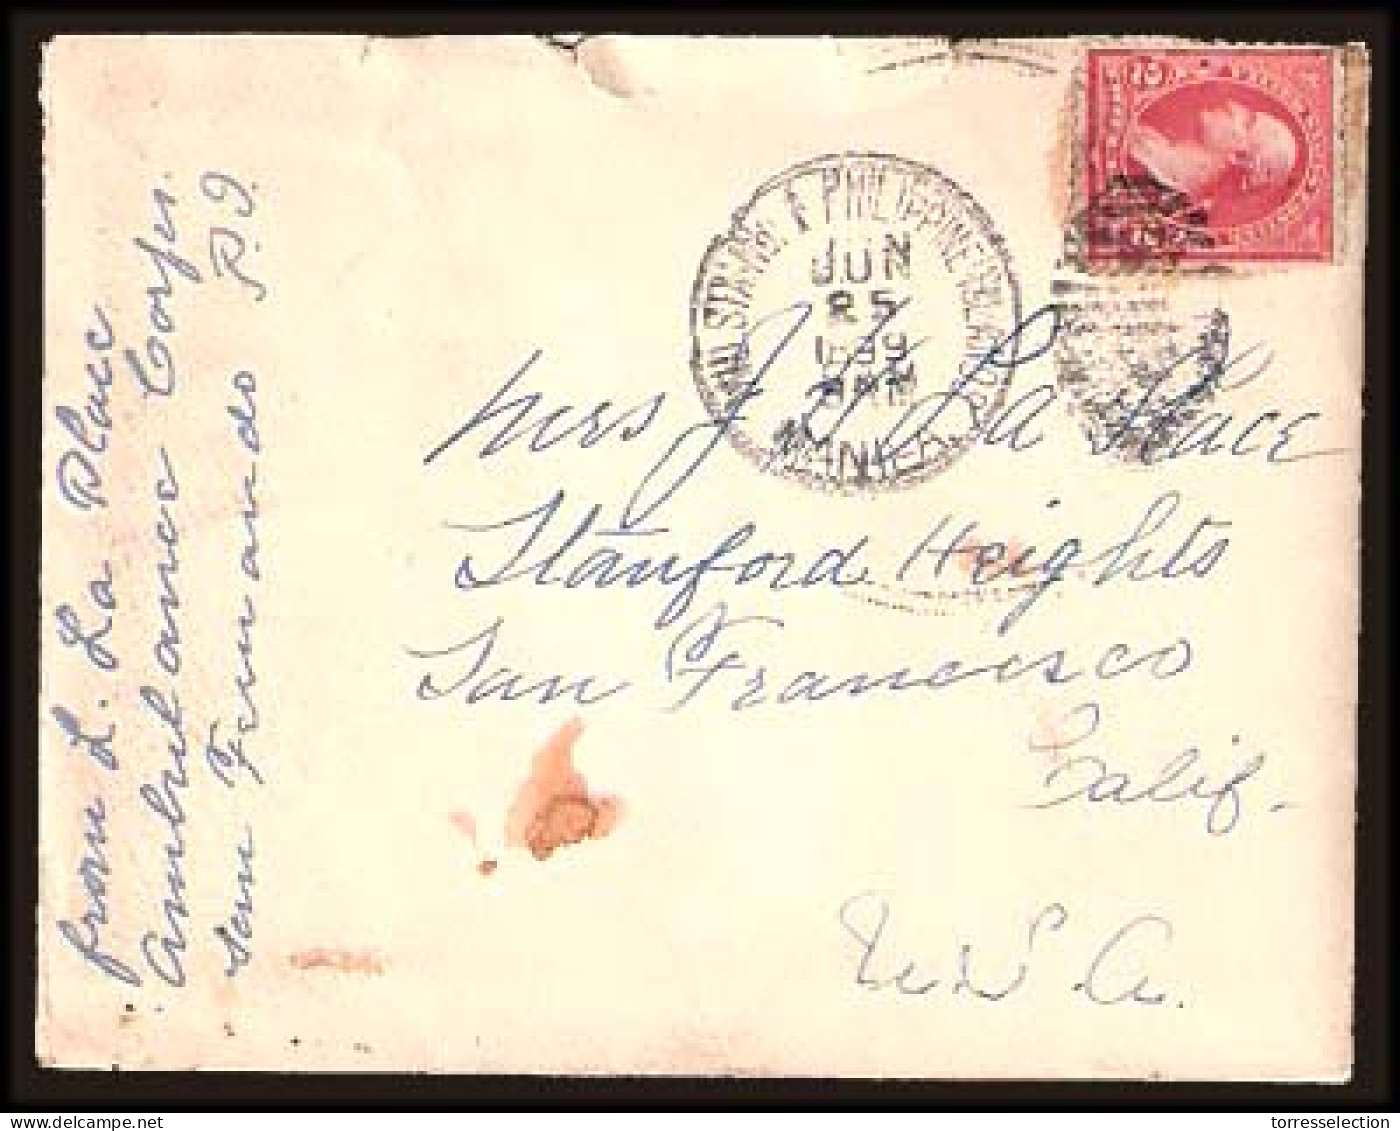 PHILIPPINES. 1899 (June 25). Manila - USA. Soldiers Letter With Contains. "Ambulance Corps". Very Rare. Shows Excellent. - Filipinas